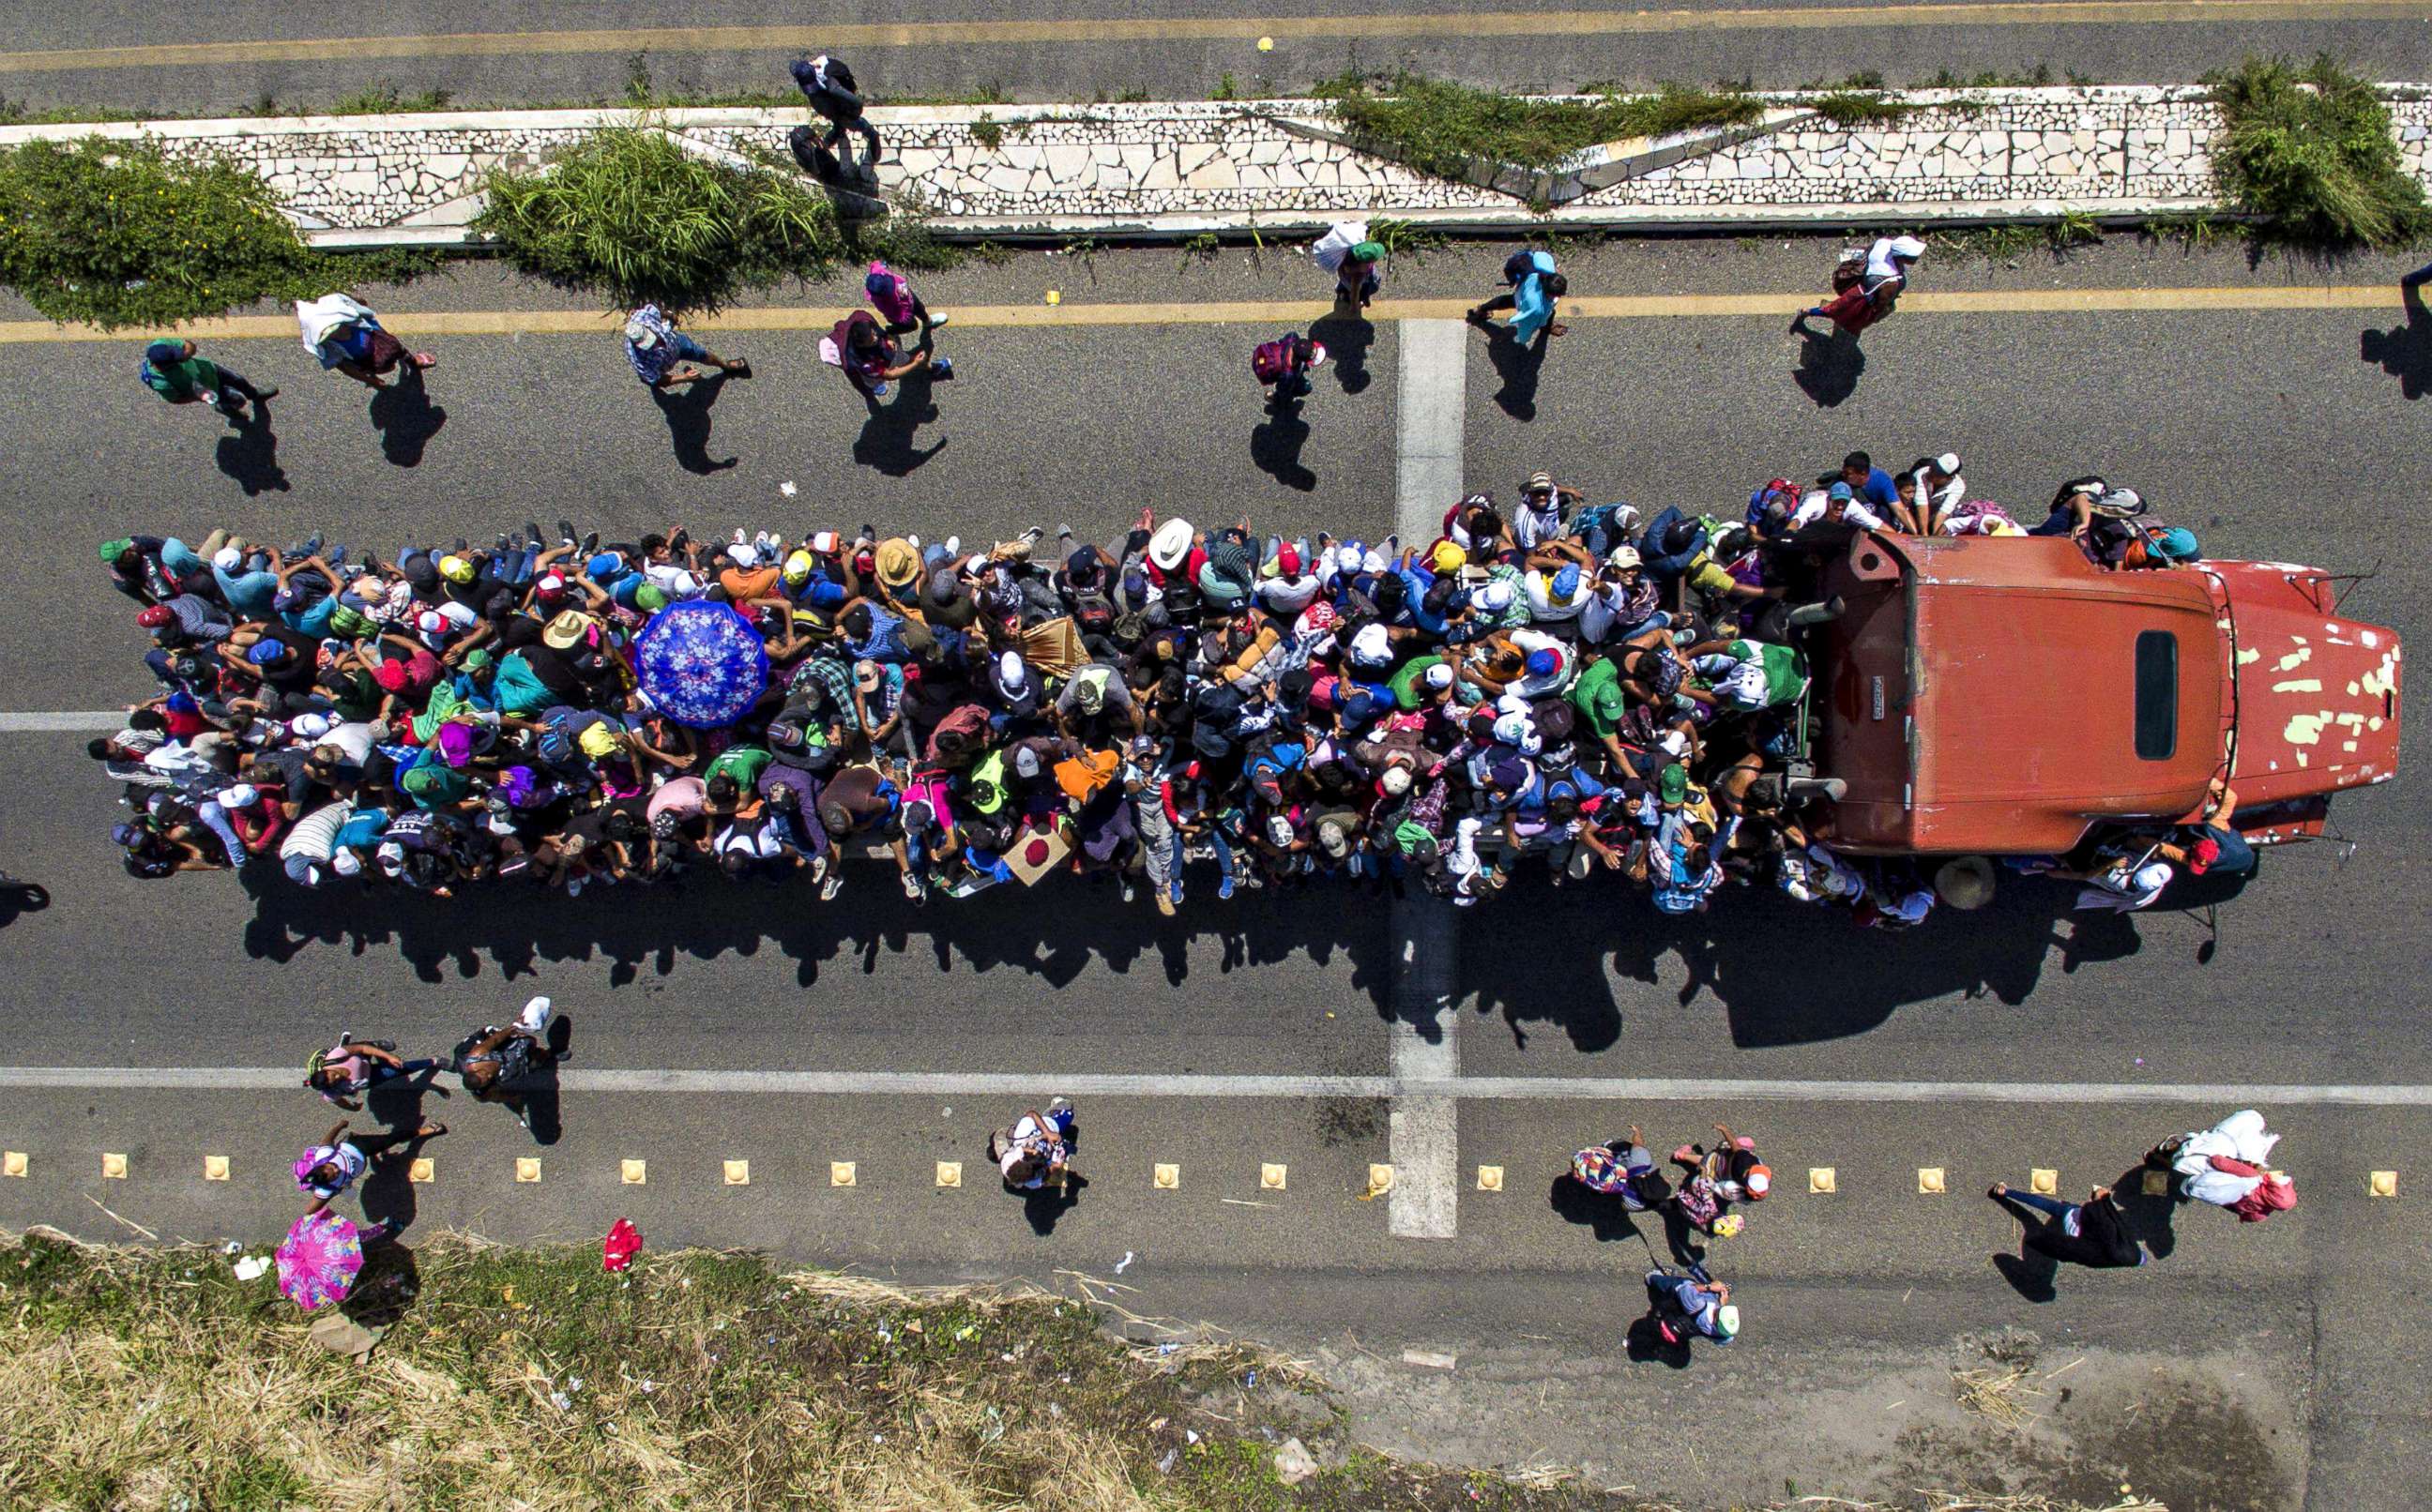 PHOTO: Aerial view of Honduran migrants on board a truck as they take part in a caravan heading to the U.S., in the outskirts of Tapachula, on their way to Huixtla, Chiapas state, Mexico, on Oct. 22, 2018. 